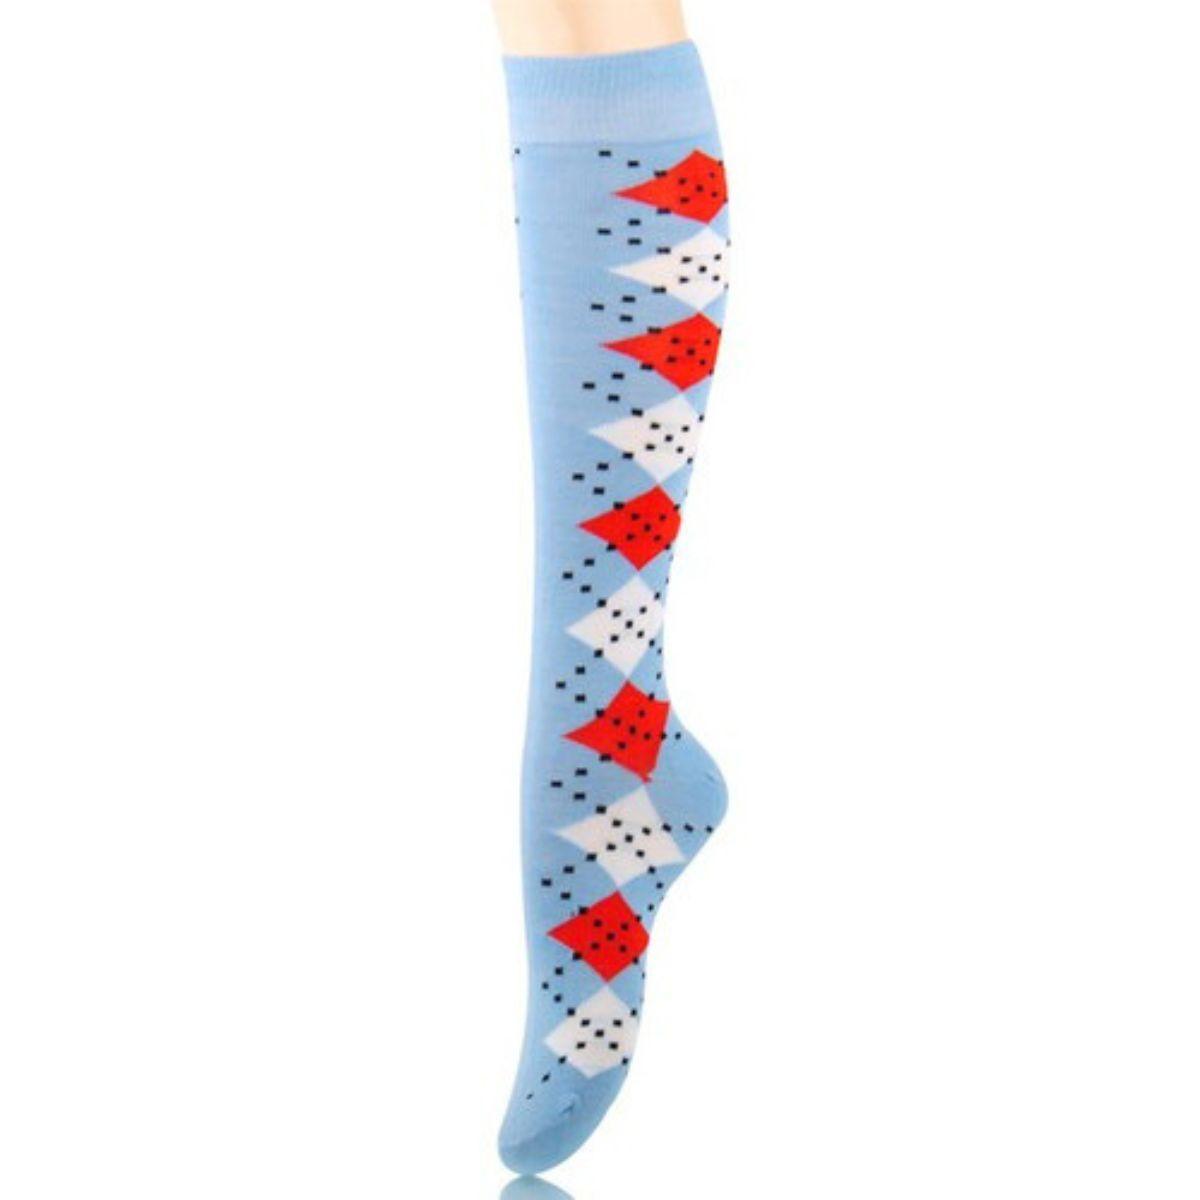 Get Dotty: Trendy Light Blue Women's Socks with Dotted-Line Argyle